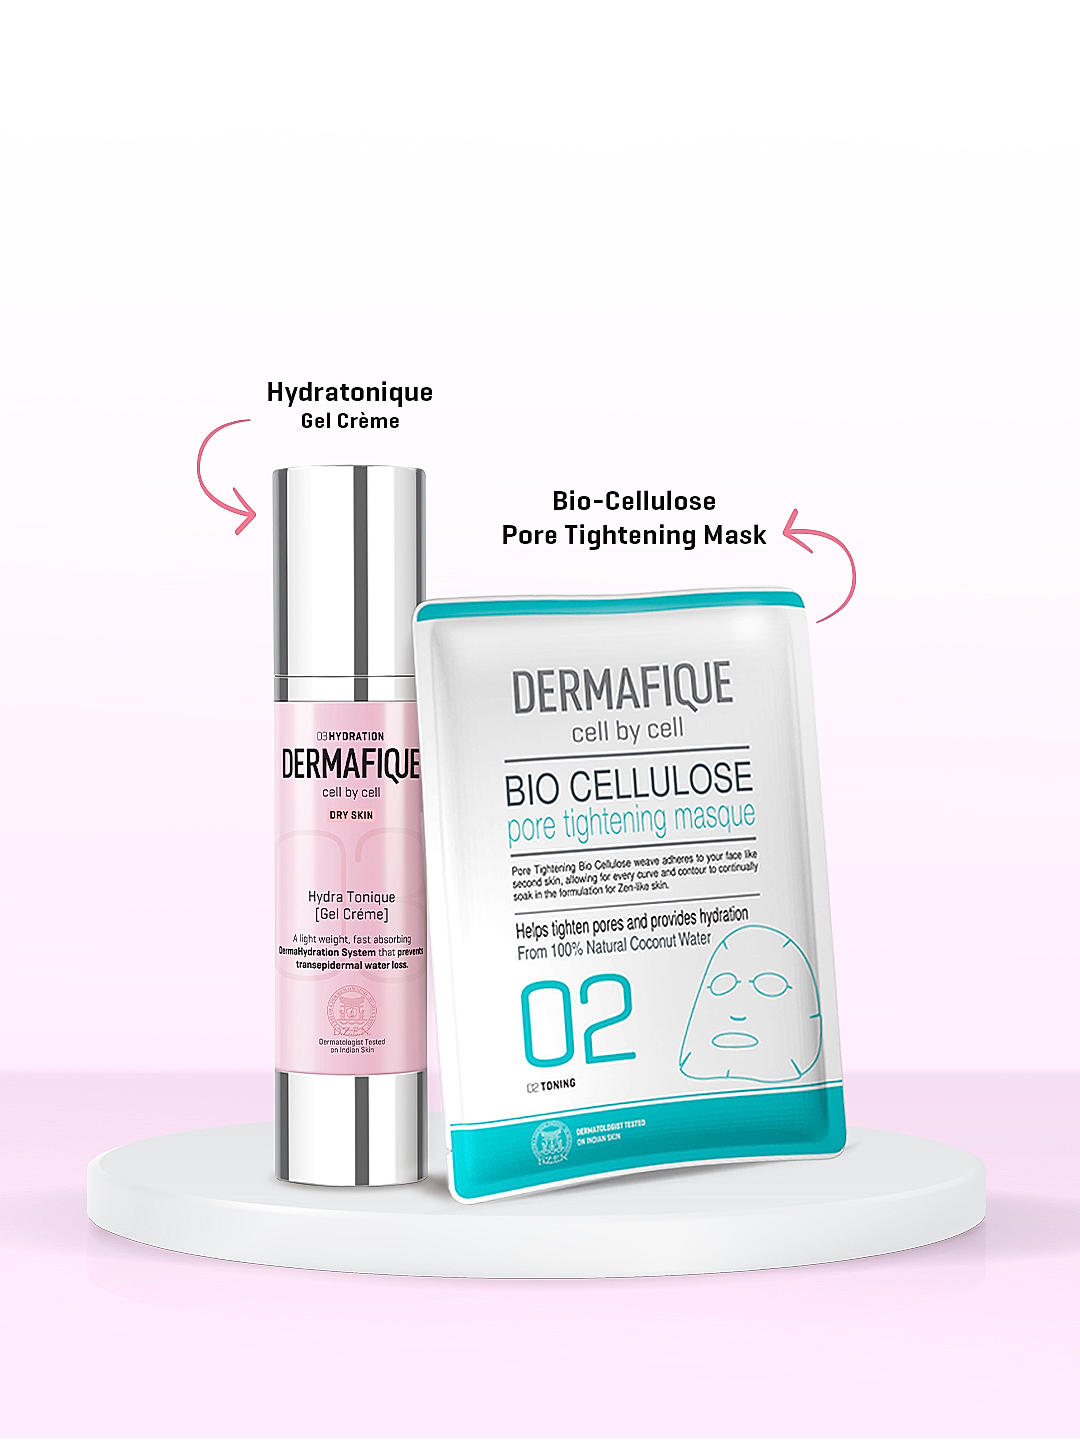 Get FREE Pore Tightening Mask with Hydra Tonique Crème